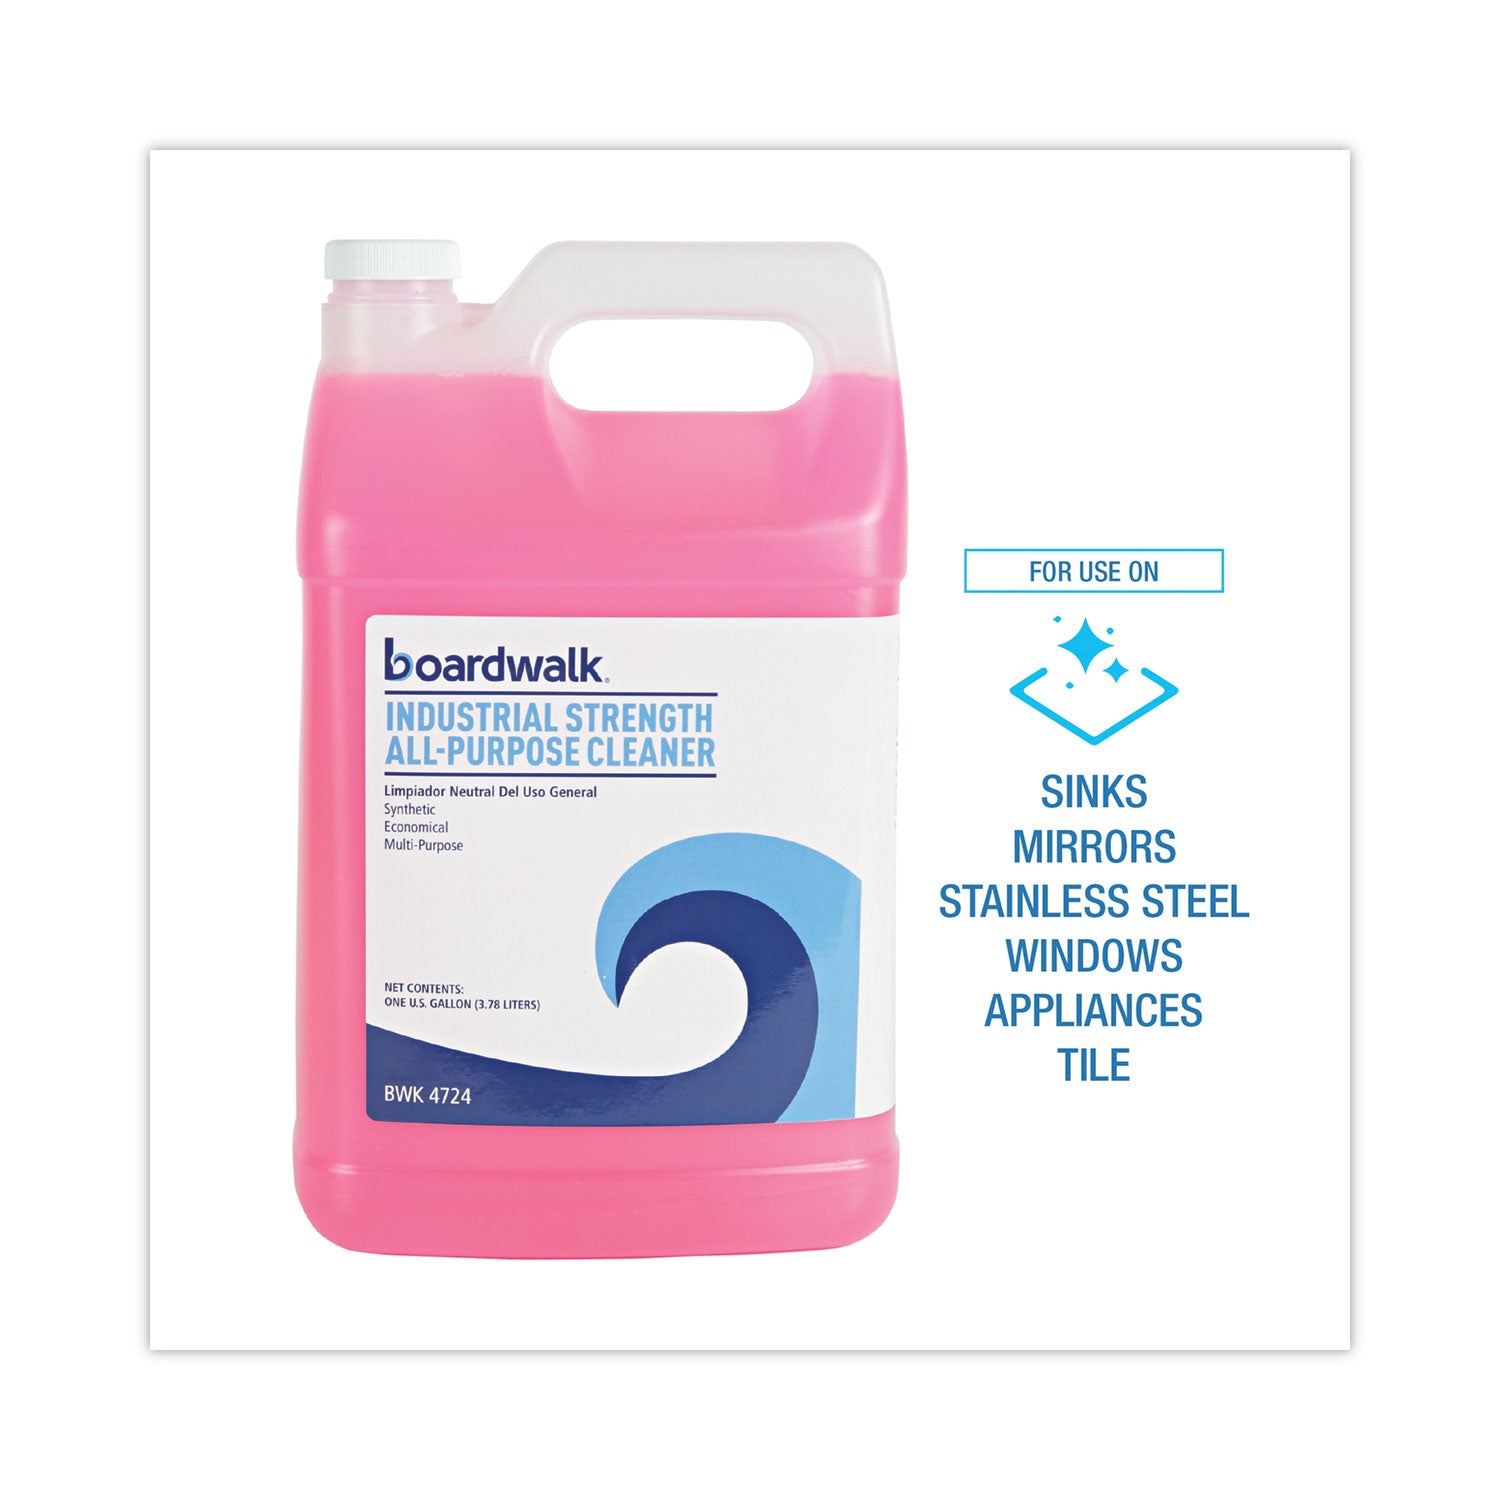 industrial-strength-all-purpose-cleaner-unscented-1-gal-bottle_bwk4724ea - 3